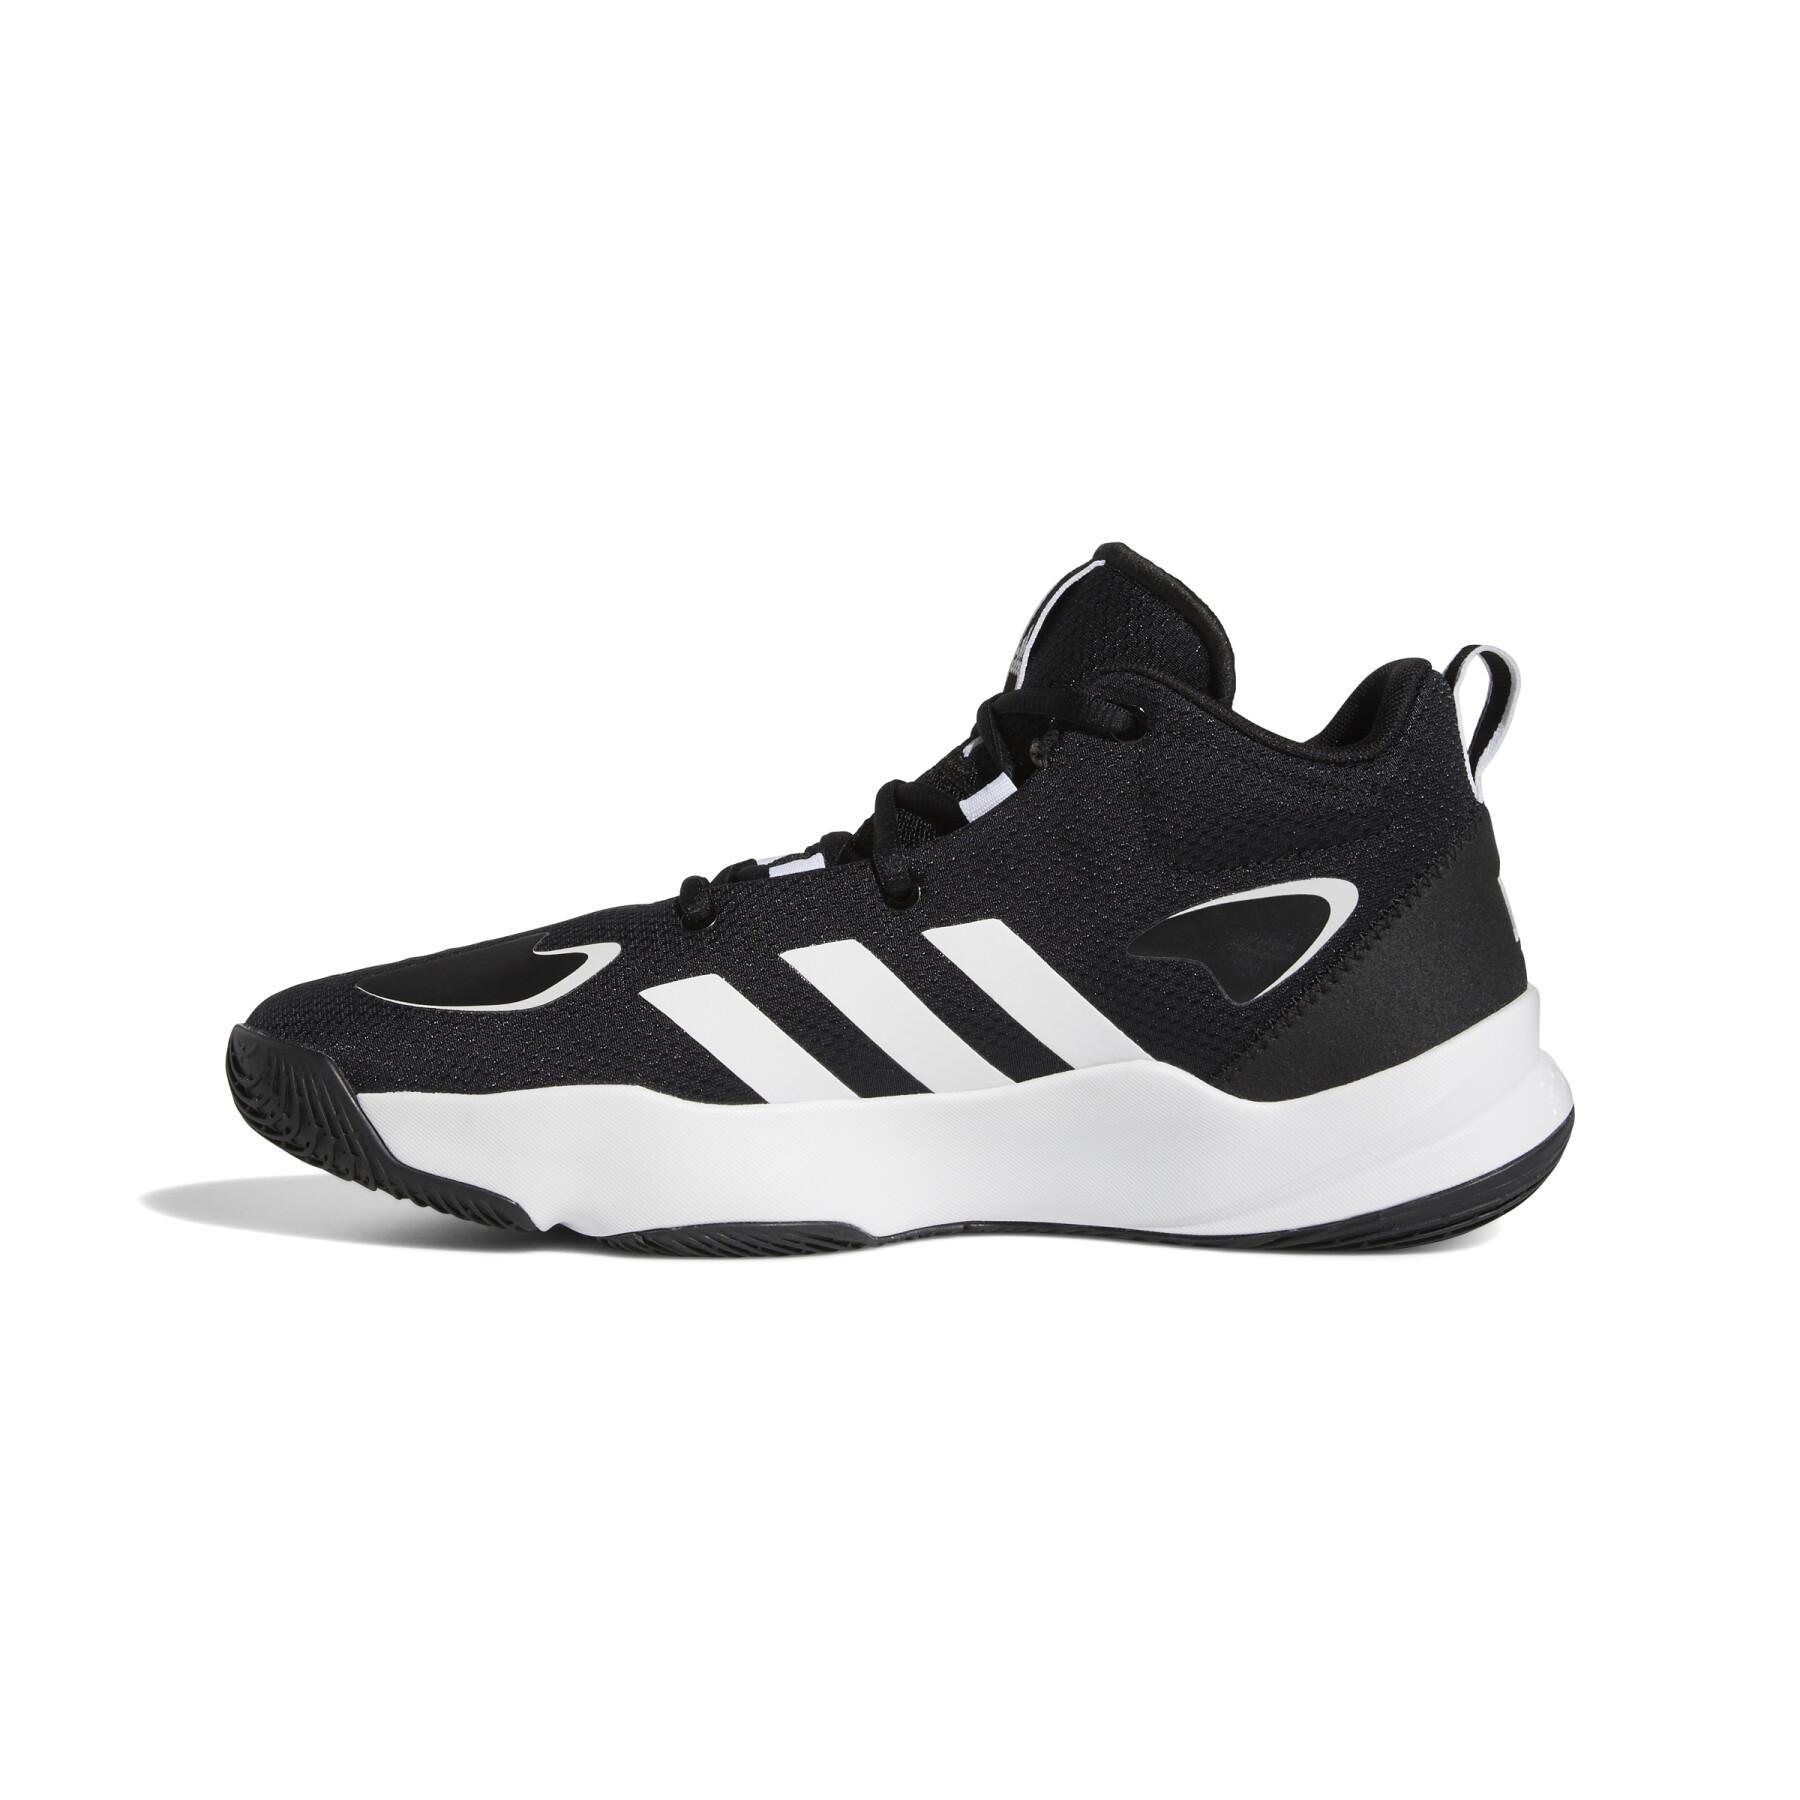 Chaussures indoor adidas Pro N3xt 2021